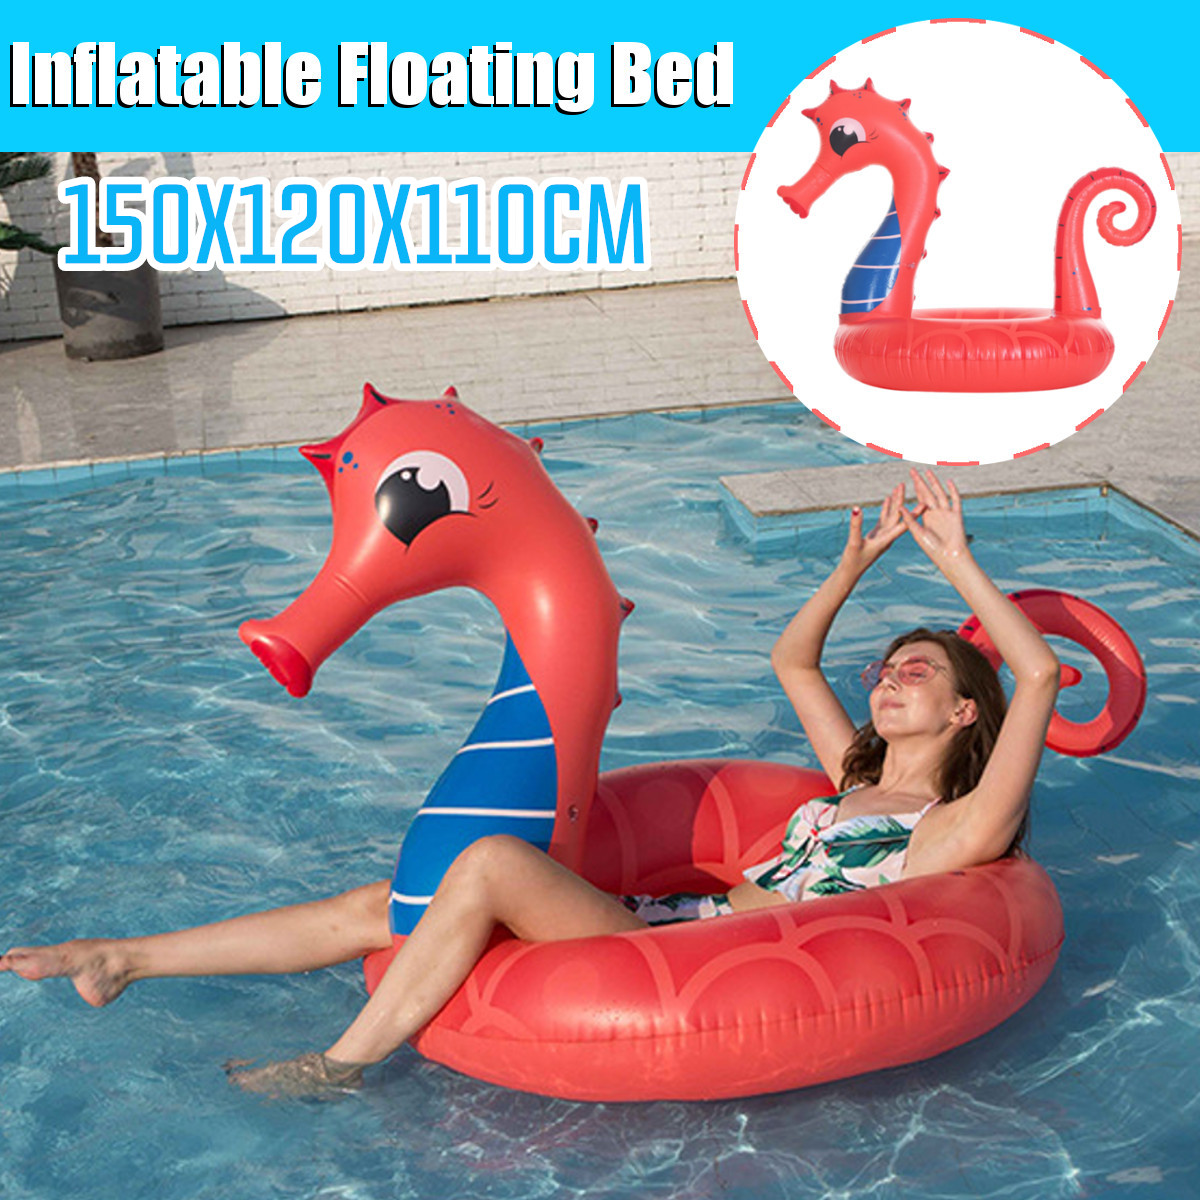 Large-Seahorse-Inflatable-Hippocampus-Giant-Swimming-Pool-Ring-Floats-Bed-Water-Pool-Raft-Camping-Be-1723619-1